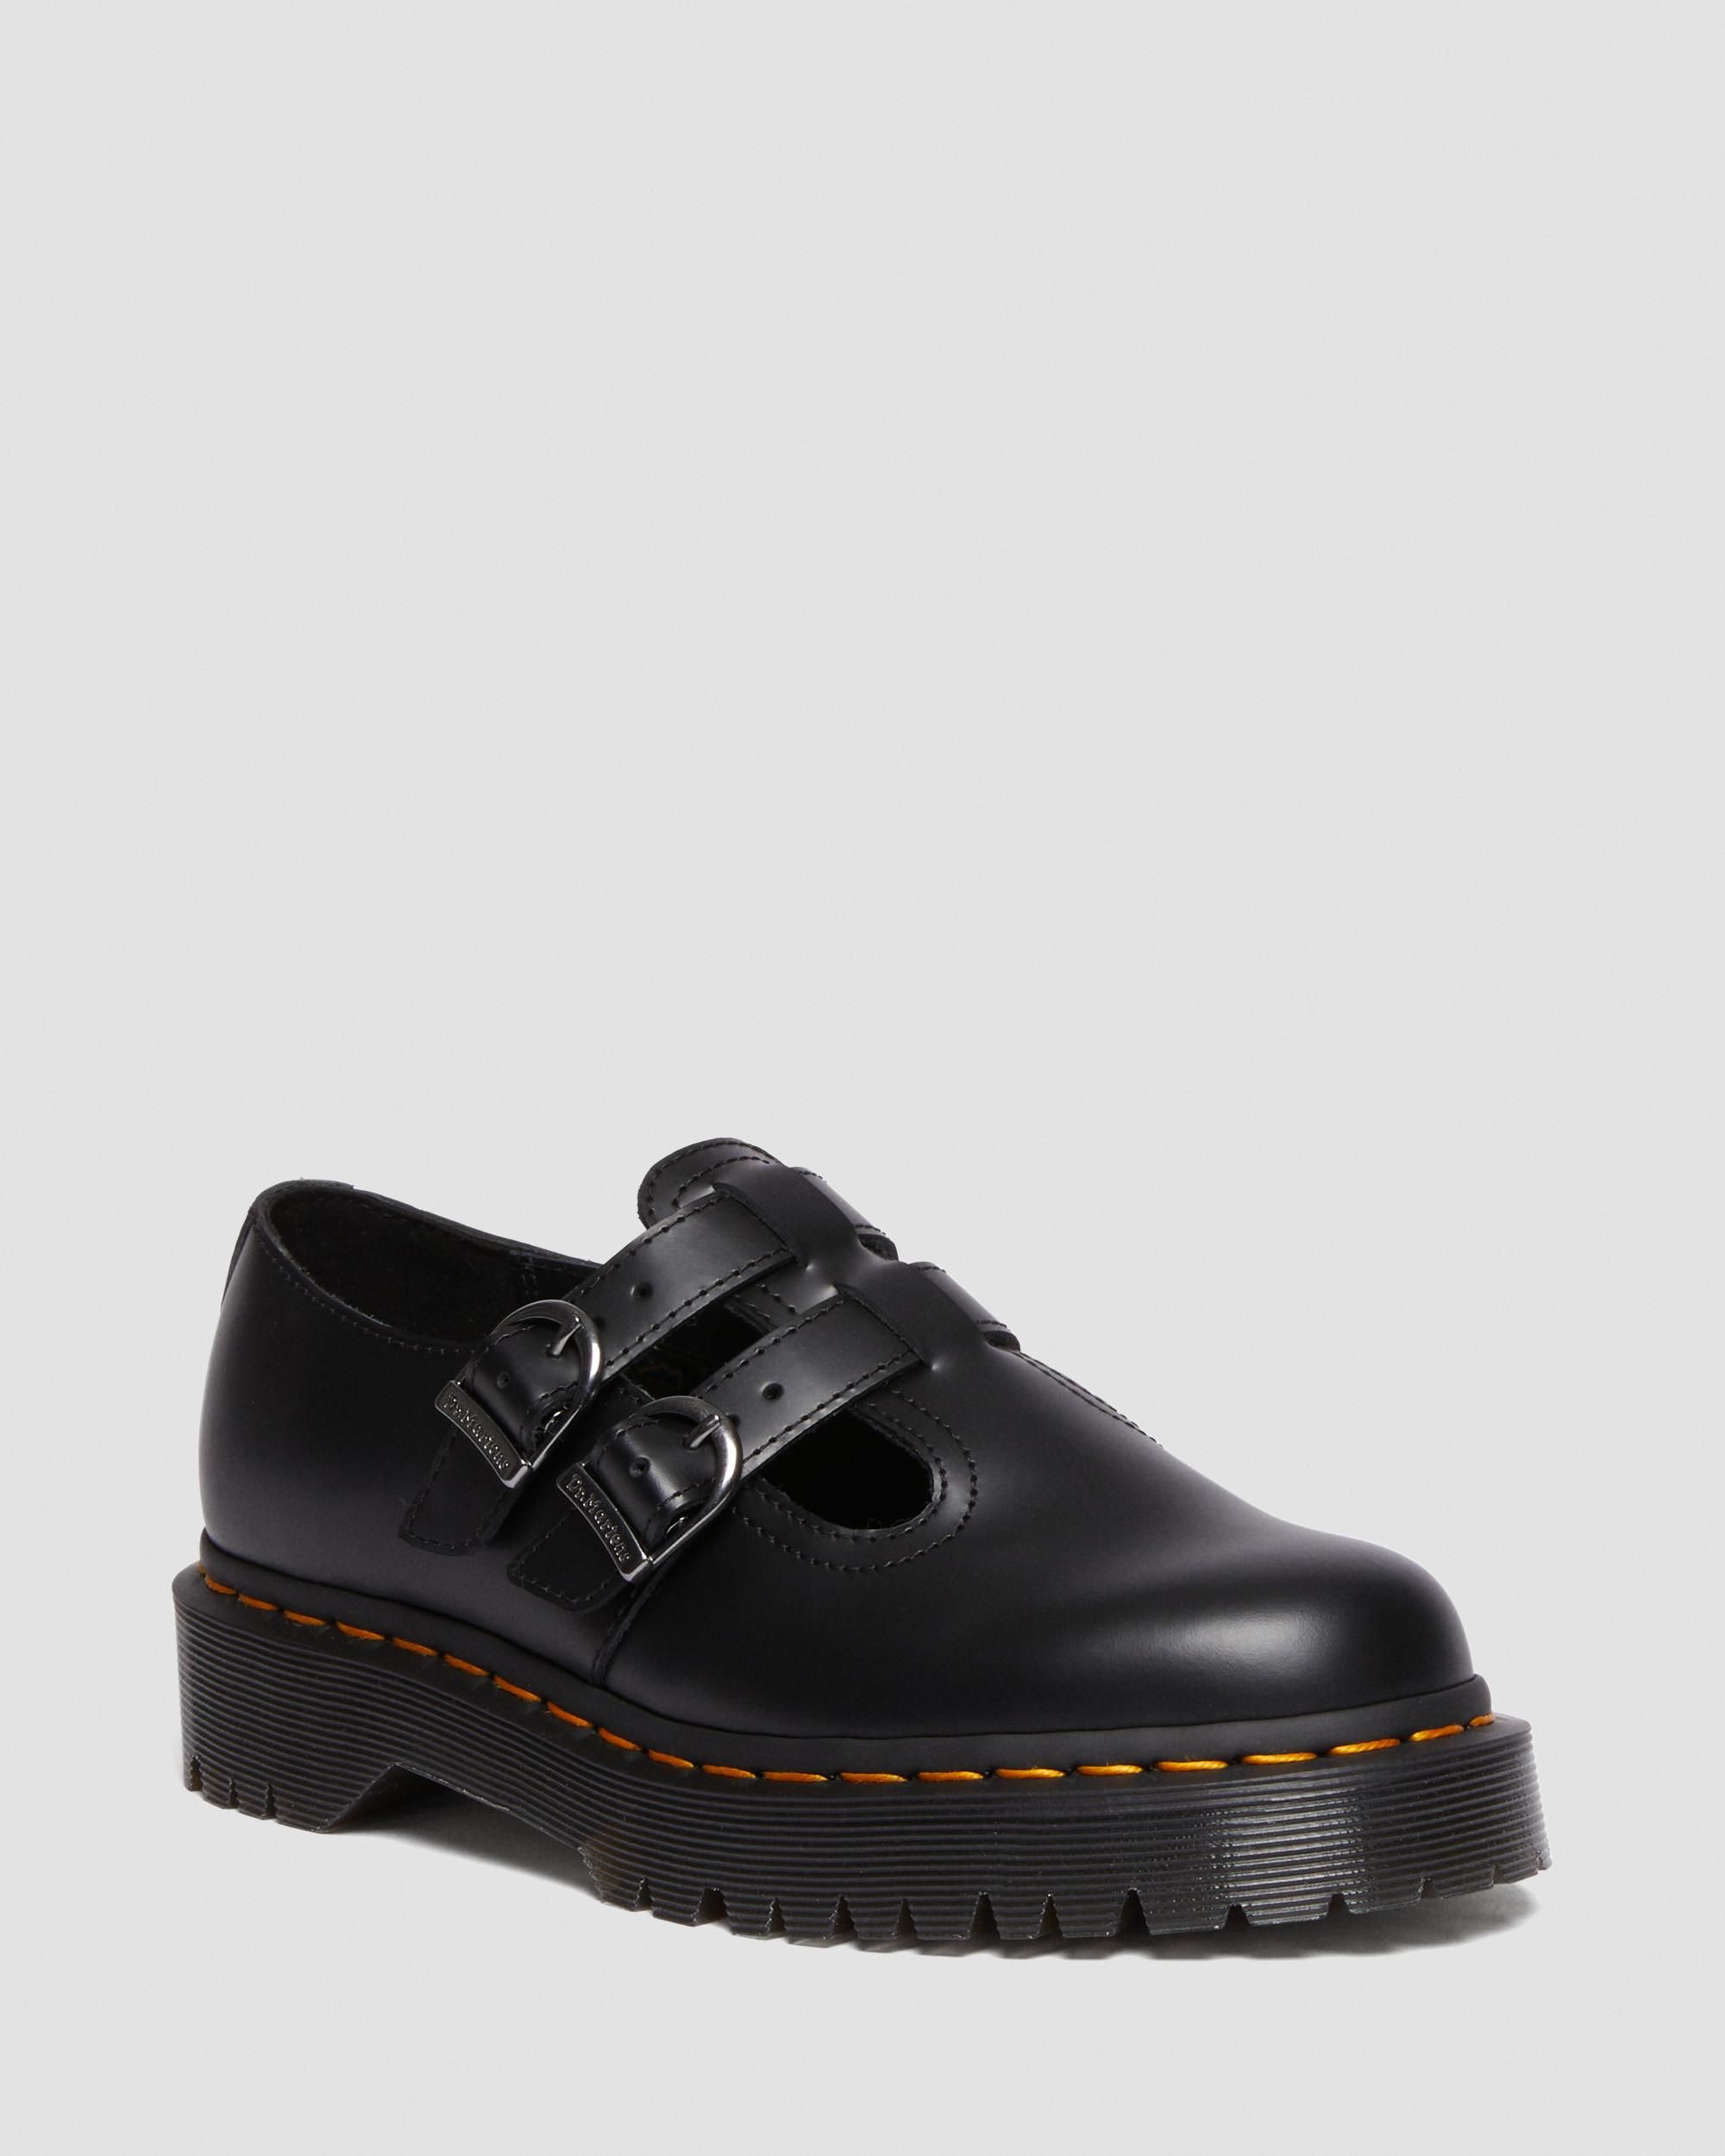 8065 II Bex Smooth Leather Platform Mary Jane Shoes | Dr. Martens